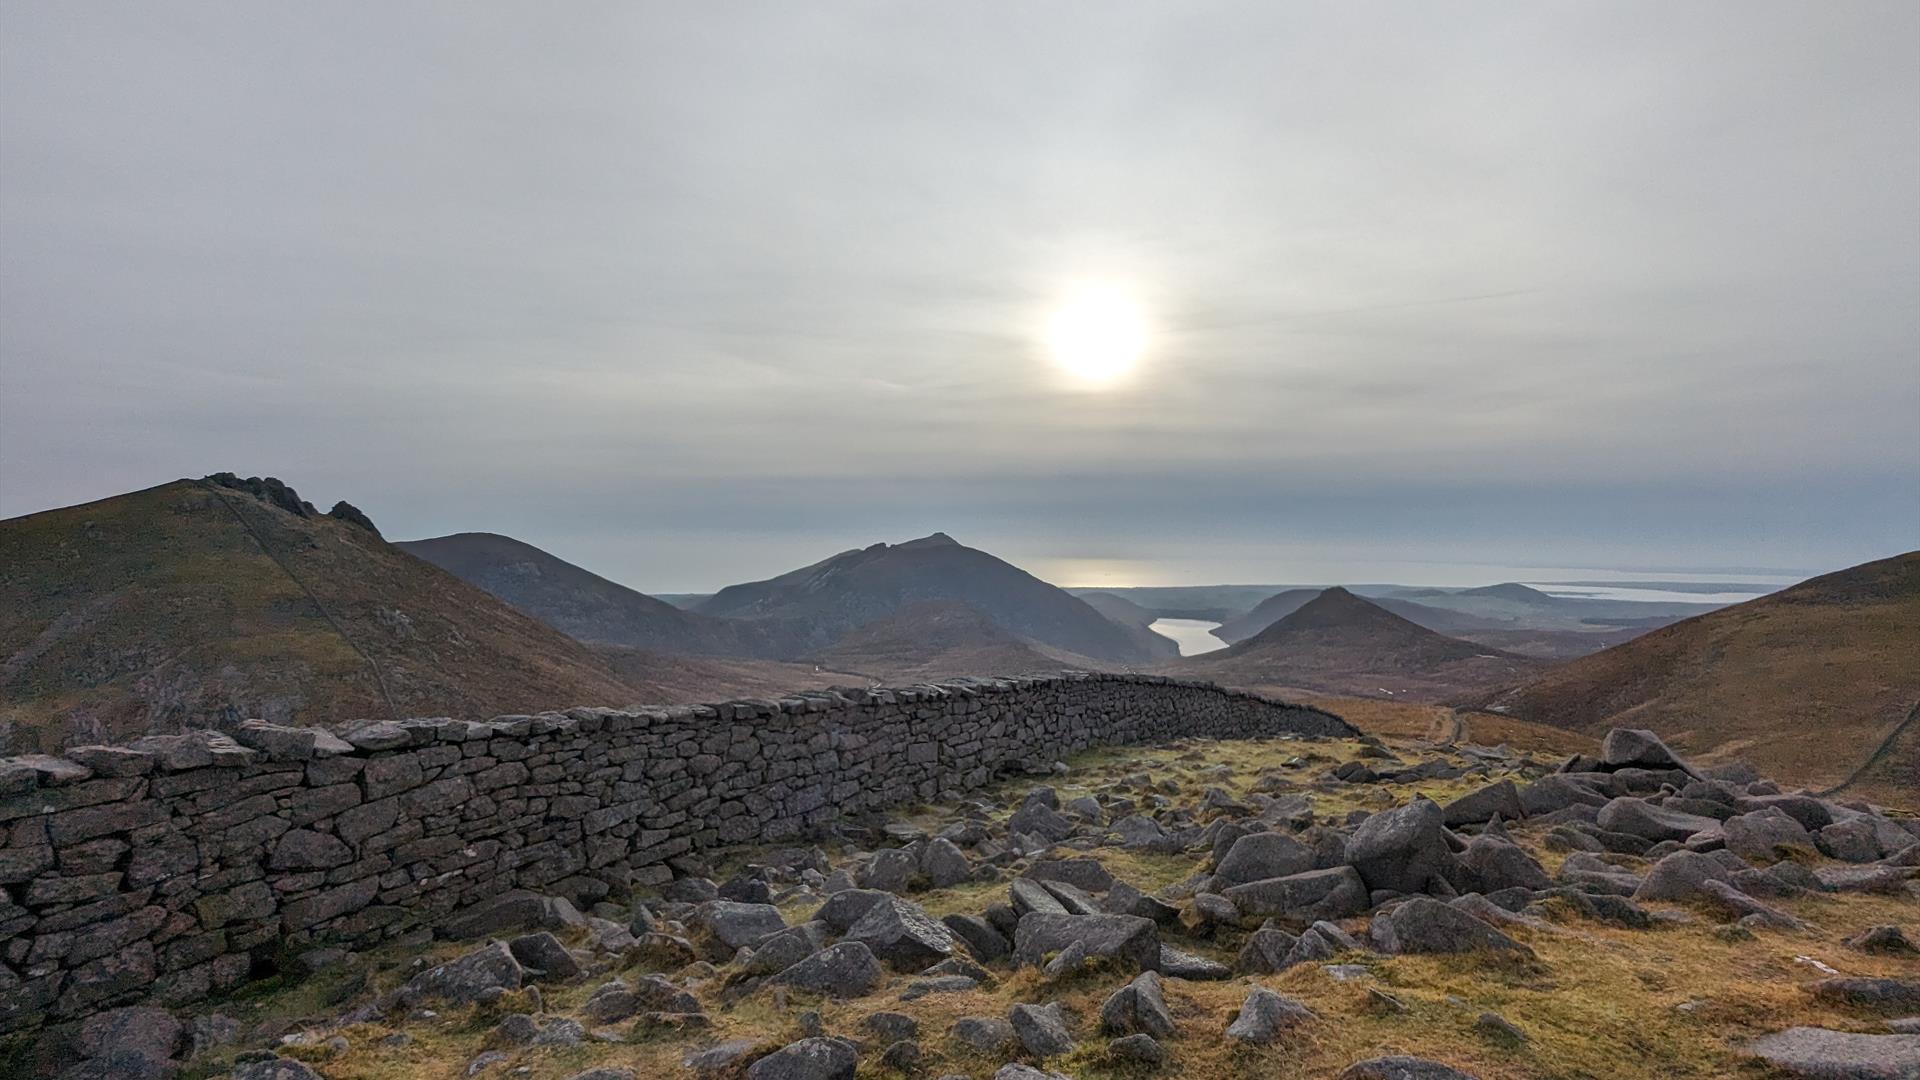 View from summit over Mourne Mountains